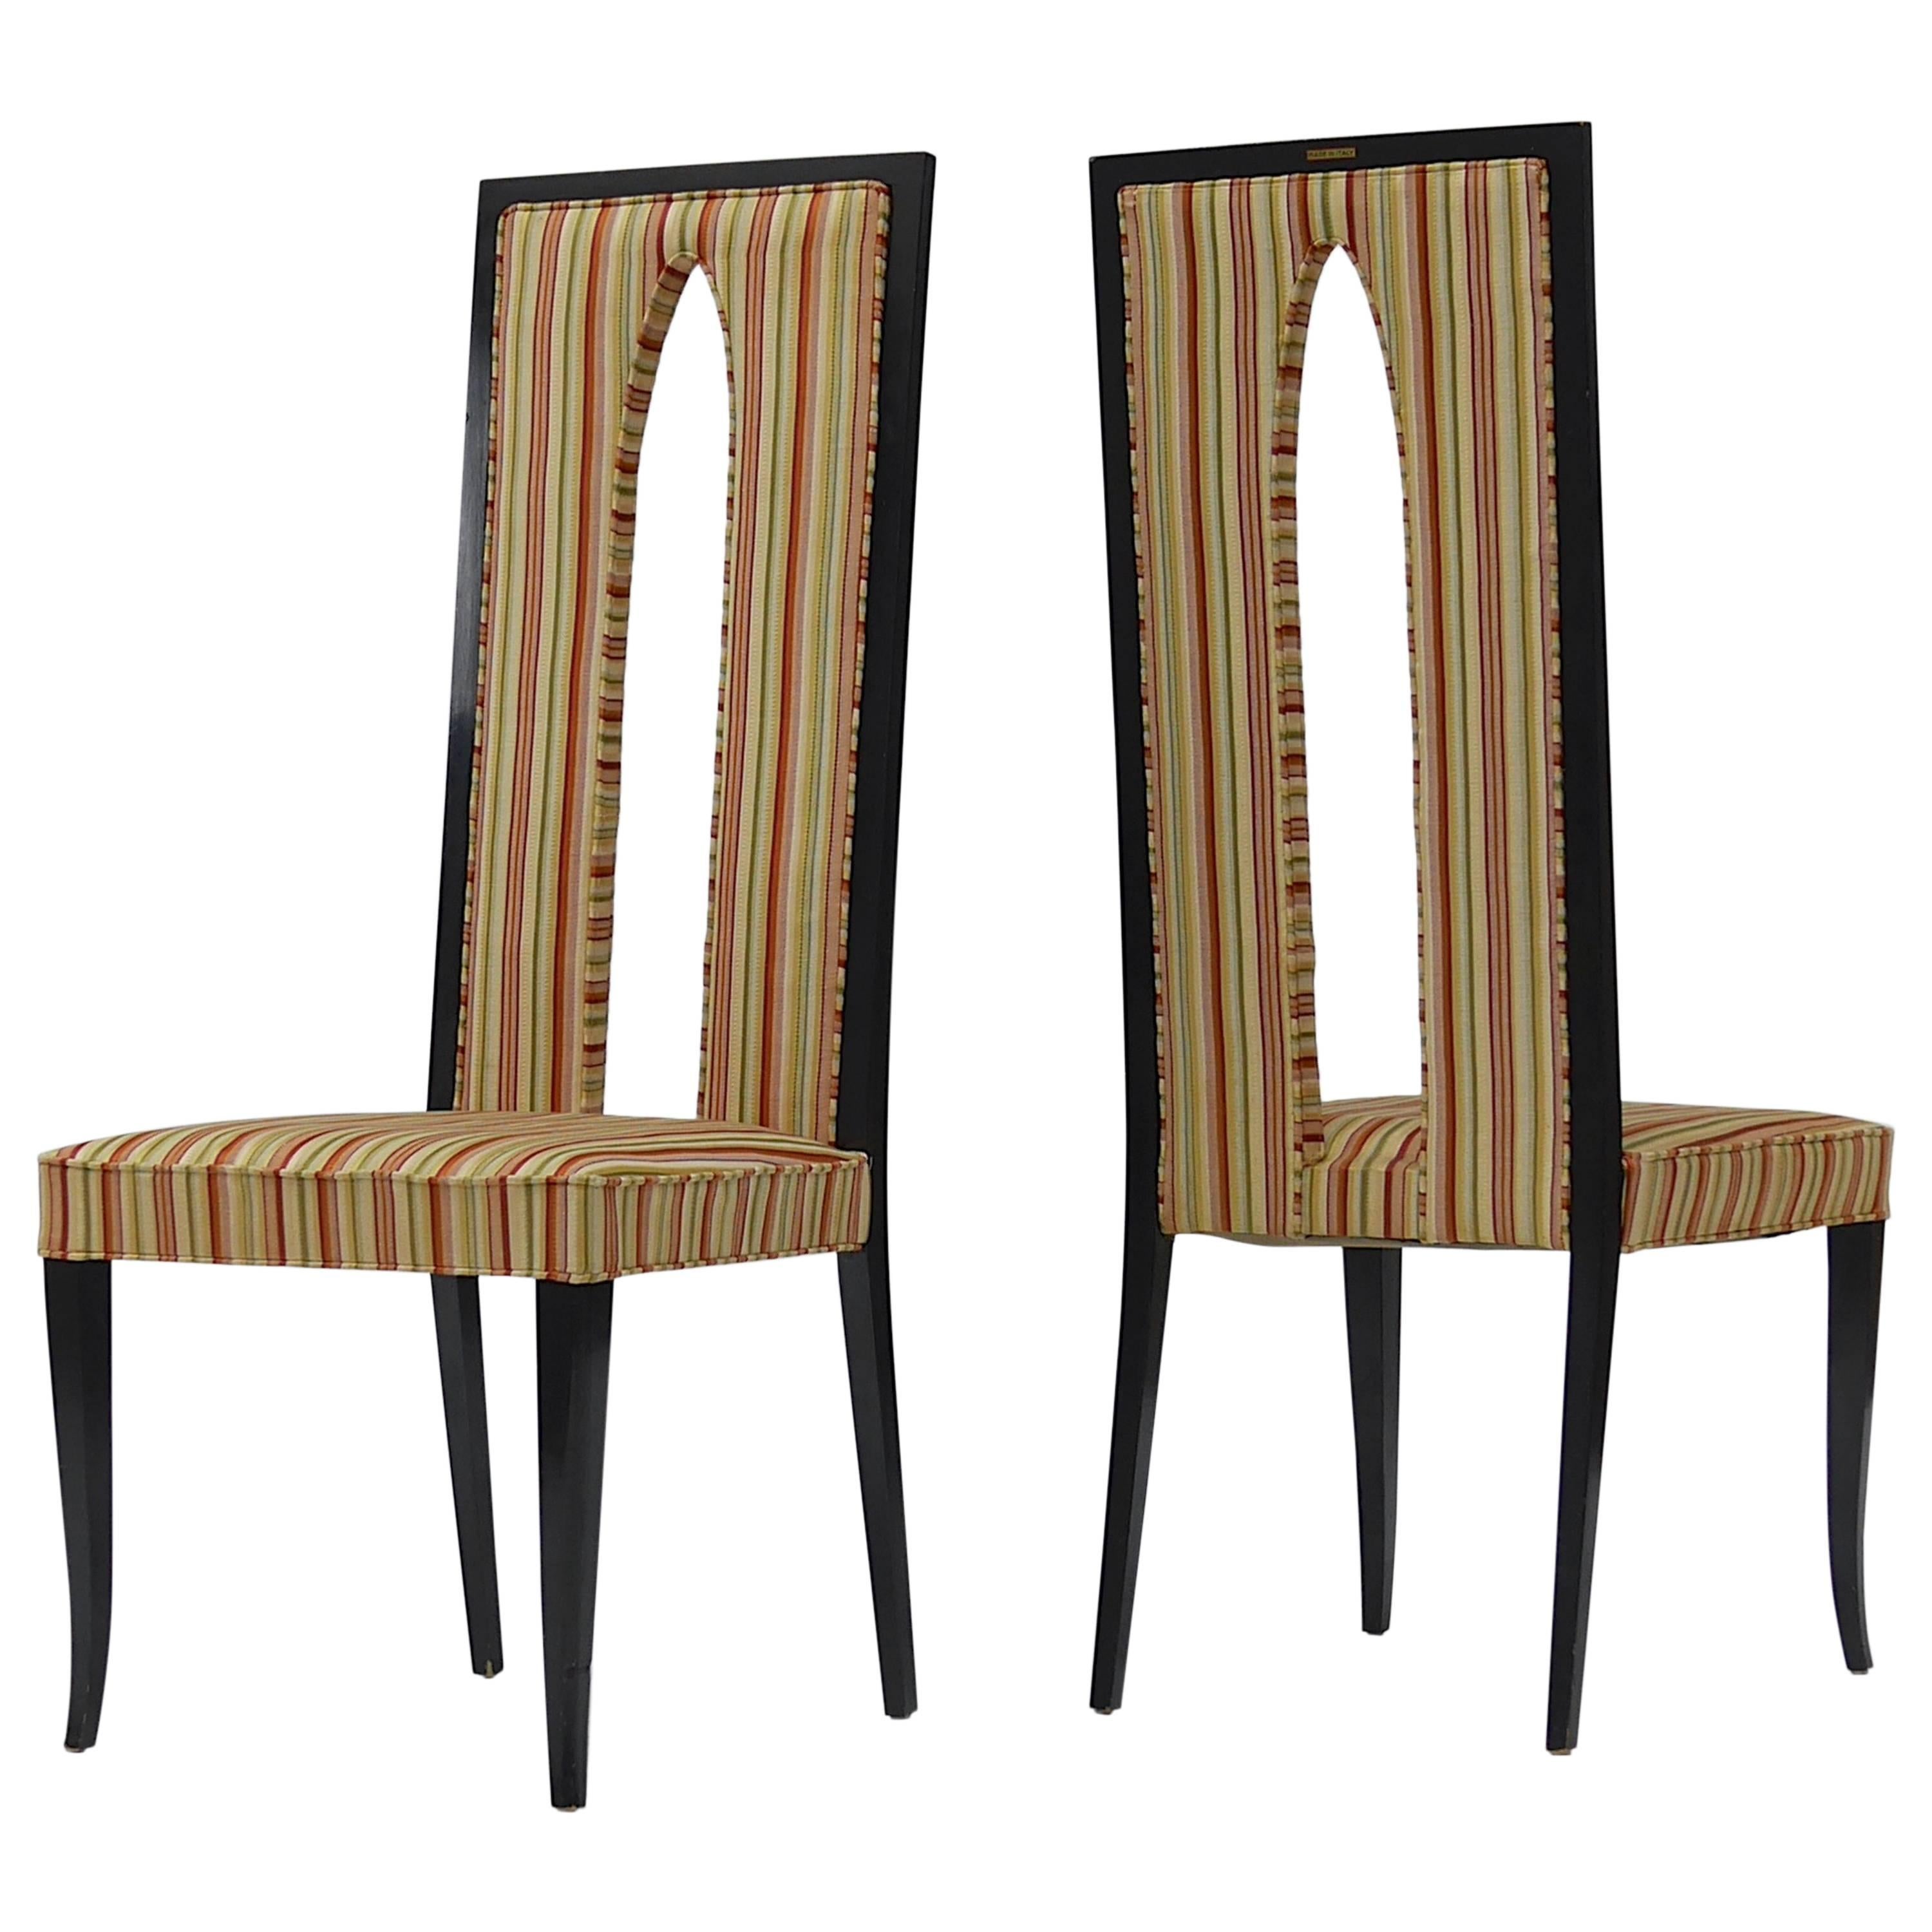 Pair of Italian High Back Sabre Leg Chairs in the Manner of Gio Ponti For Sale